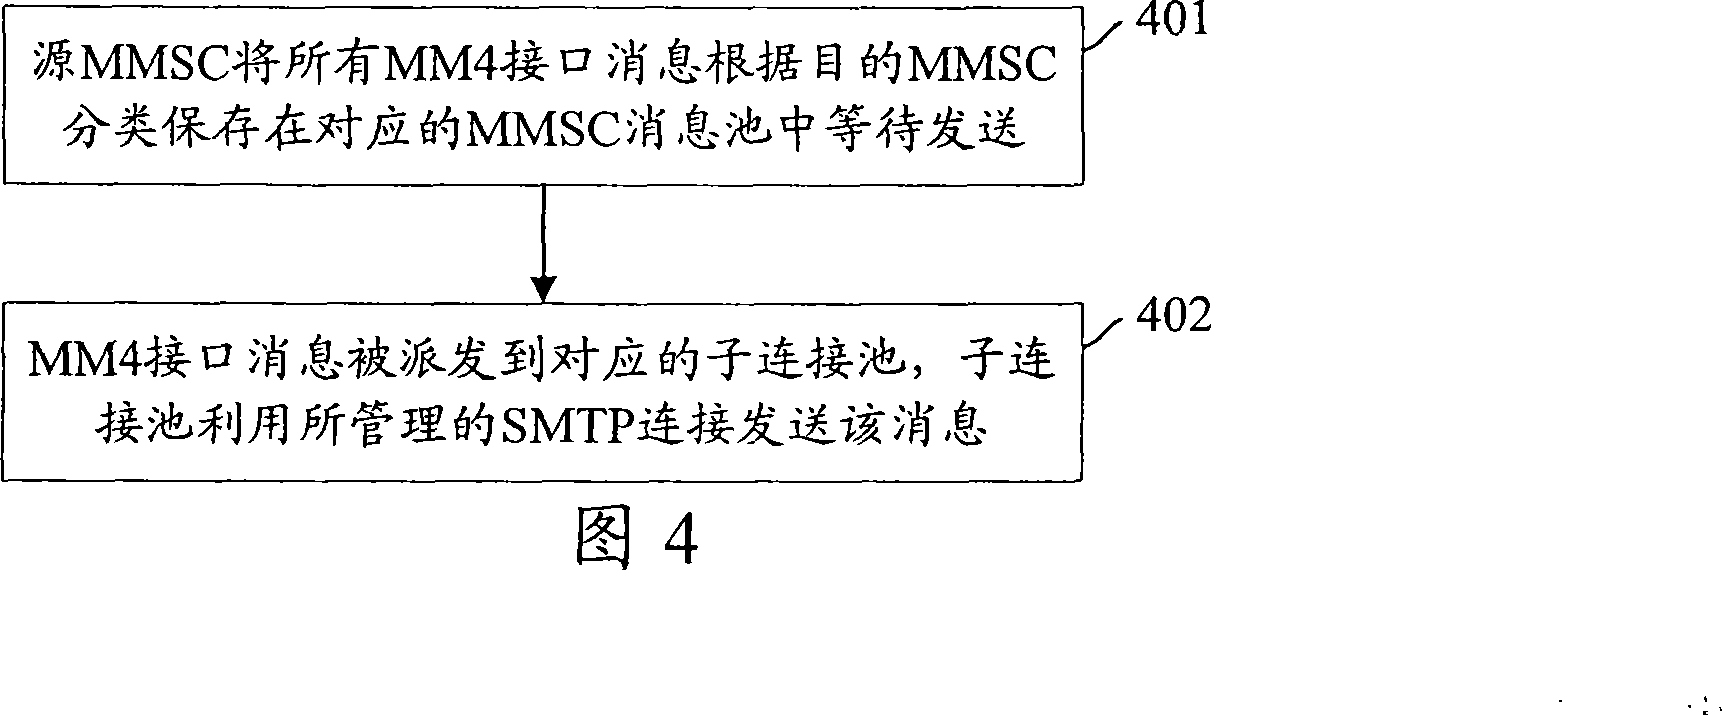 Method of transmitting MM4 interface message in multimedia message system